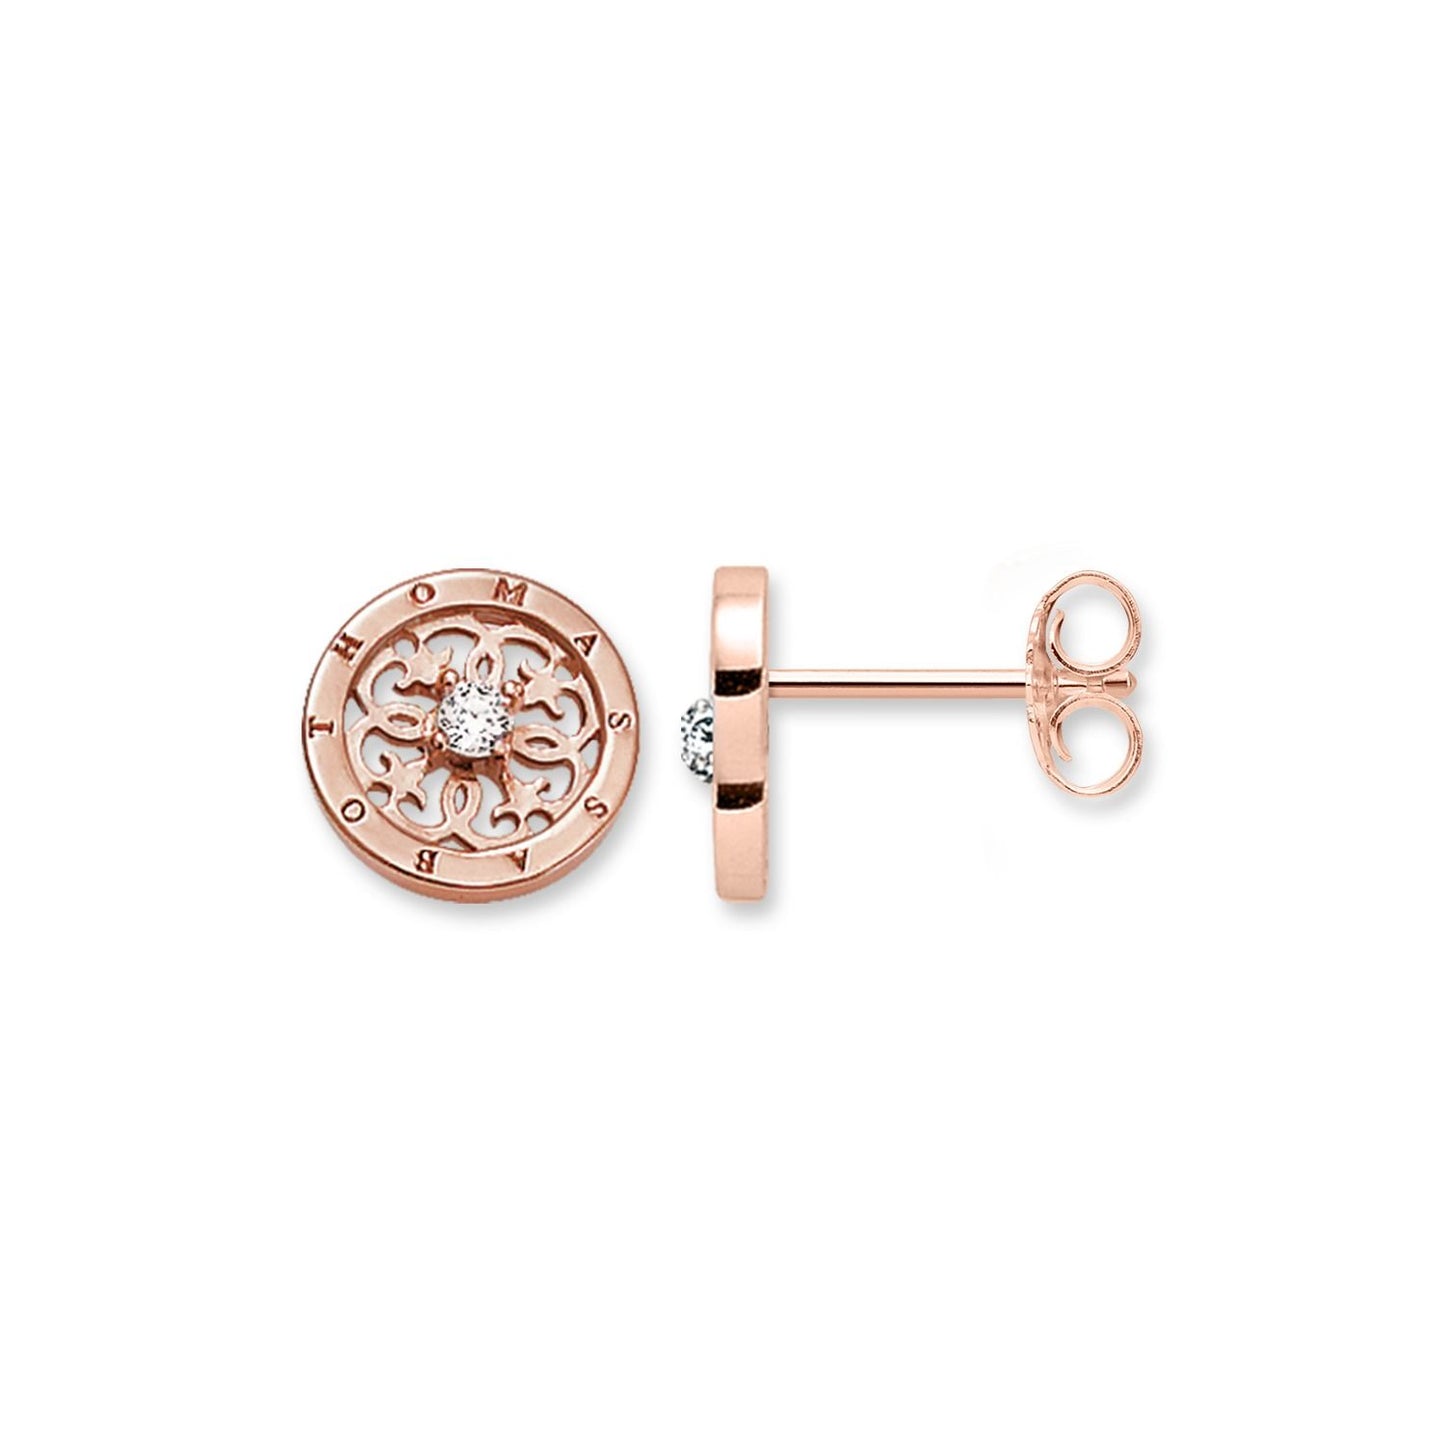 Thomas Sabo Rose Gold Plated Round Open Stud Earrings H1760-416-14